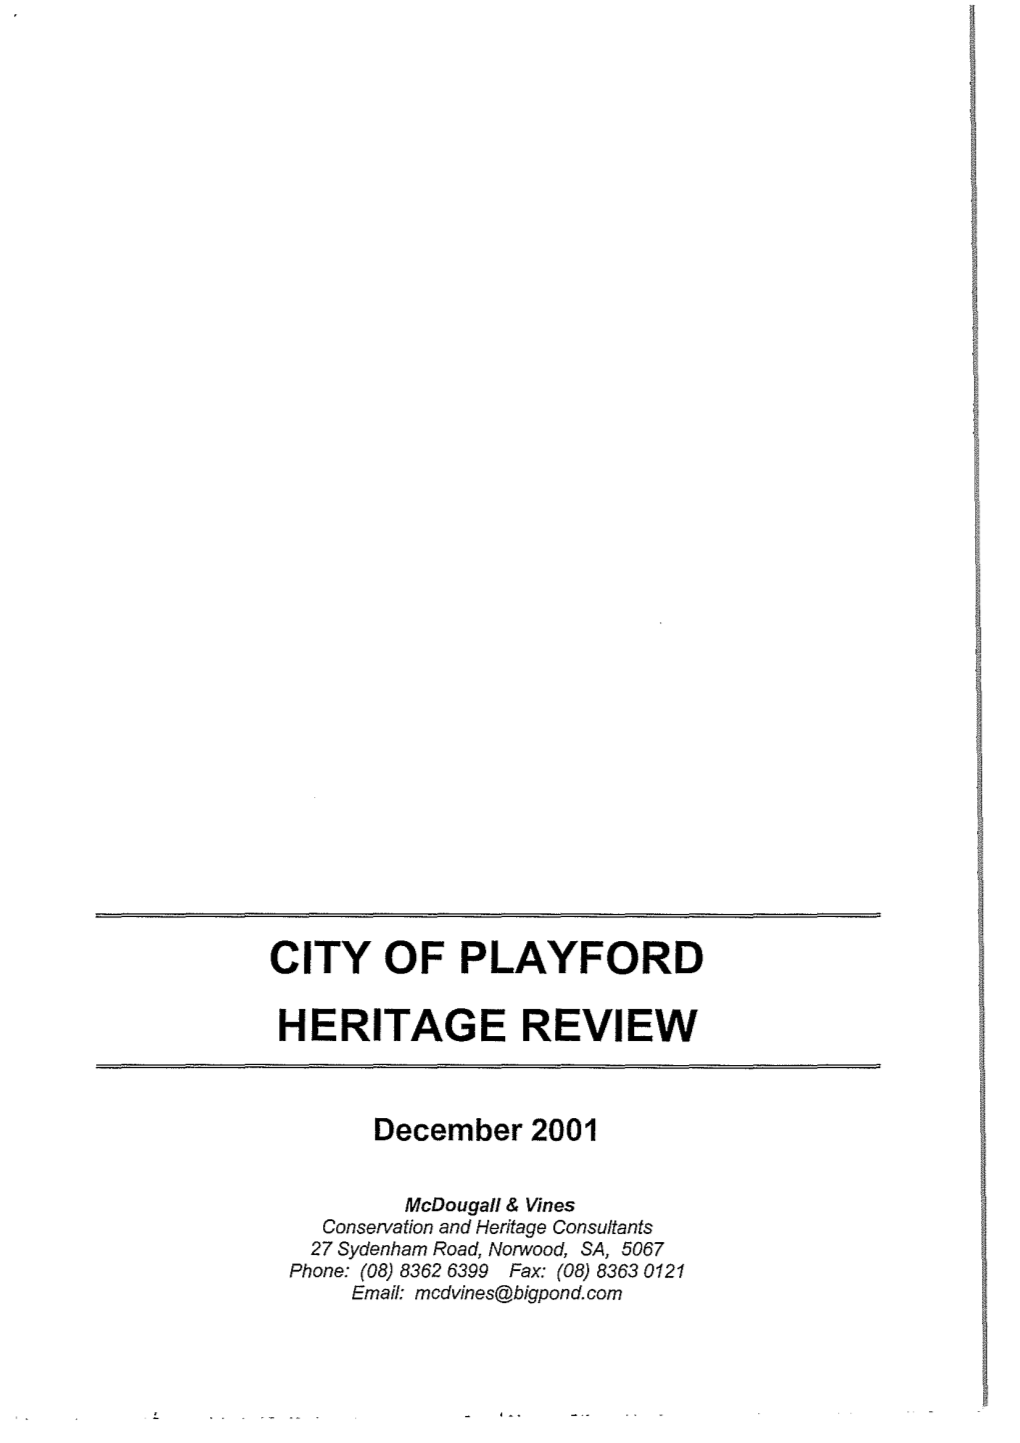 City of Playford Heritage Review